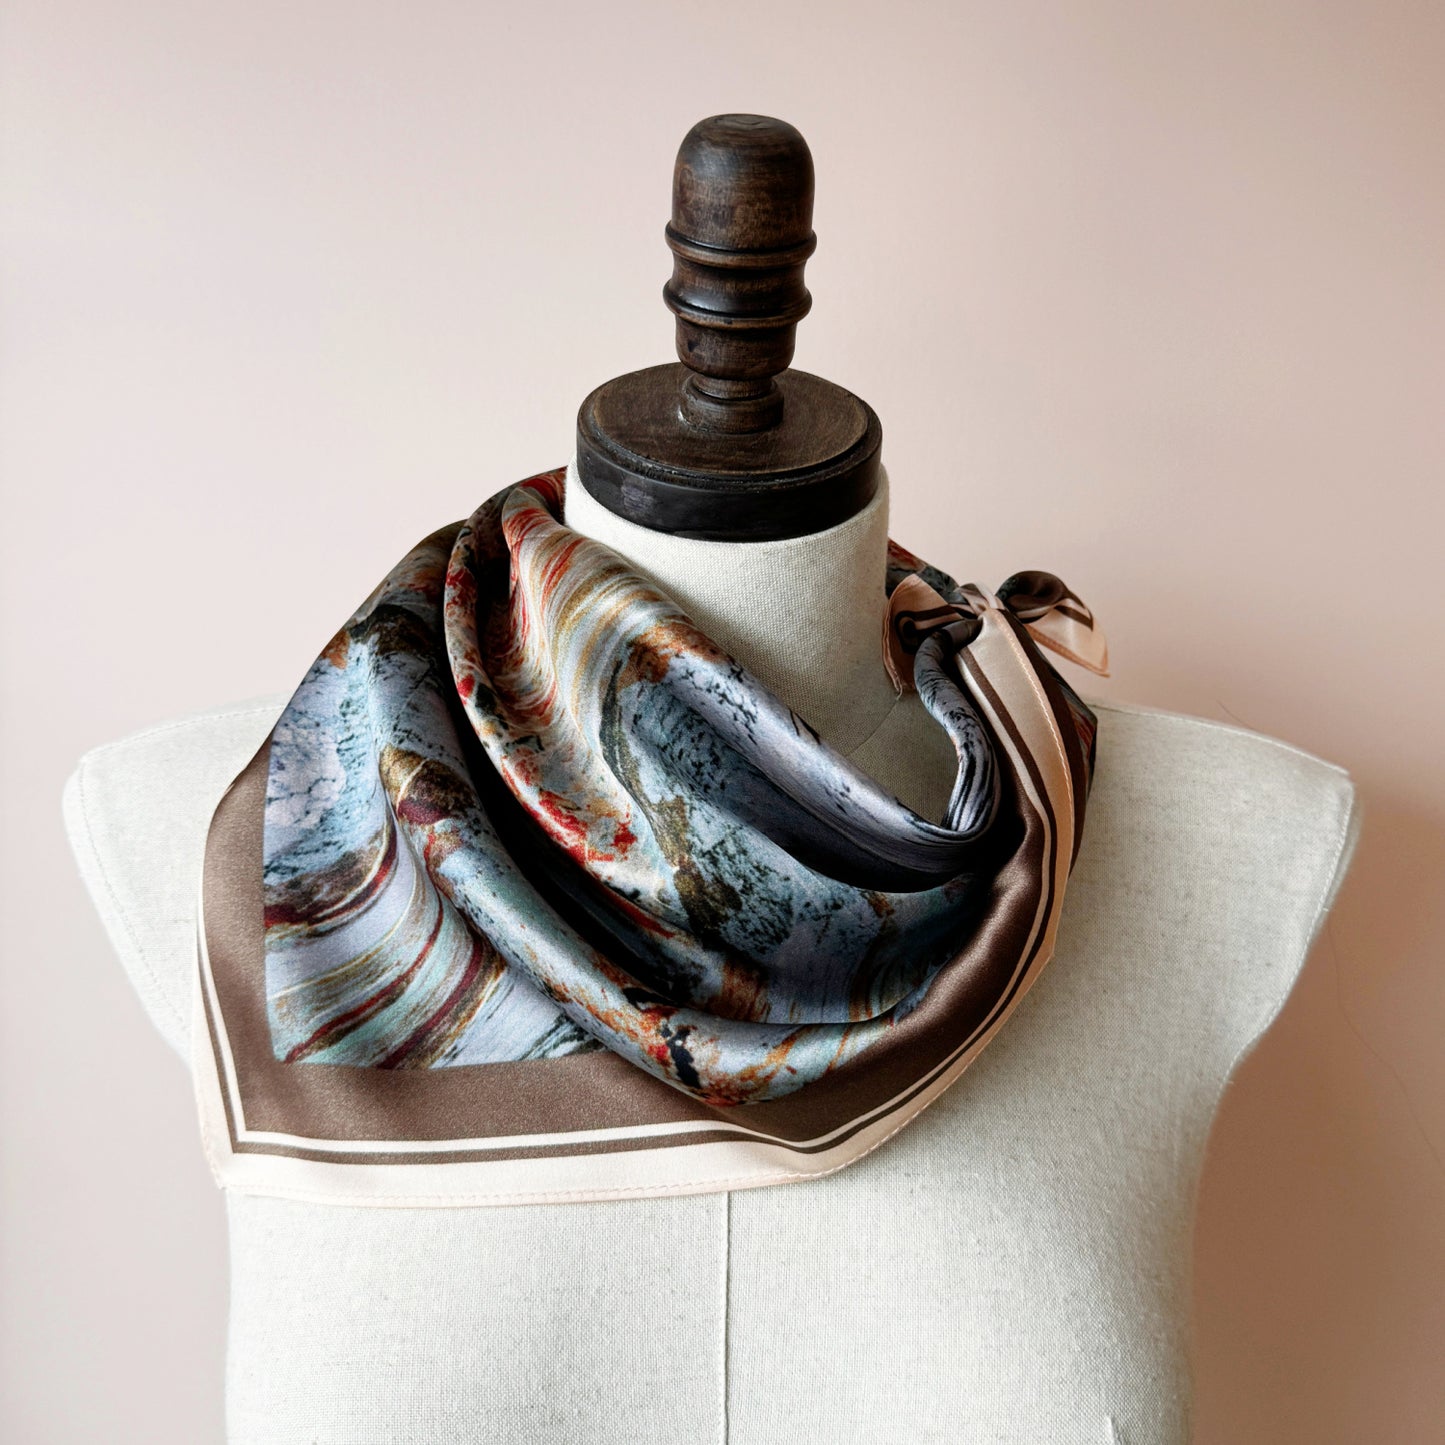 Scarf Gift, Silk Scarf, Women Silk Scarf, Men Silk Scarf, Silk Wrap, Silk Scarves, Hand Dyed Silk, Silk Hair Scarf, Silk Bandana, Silk Square Scarf, Silk Headband, Silk Ponytail Scarf, Gifts for Girlfriend, Gifts for Mom, Gifts for Sister, Gifts for Wife, Gifts for Her, Gifts